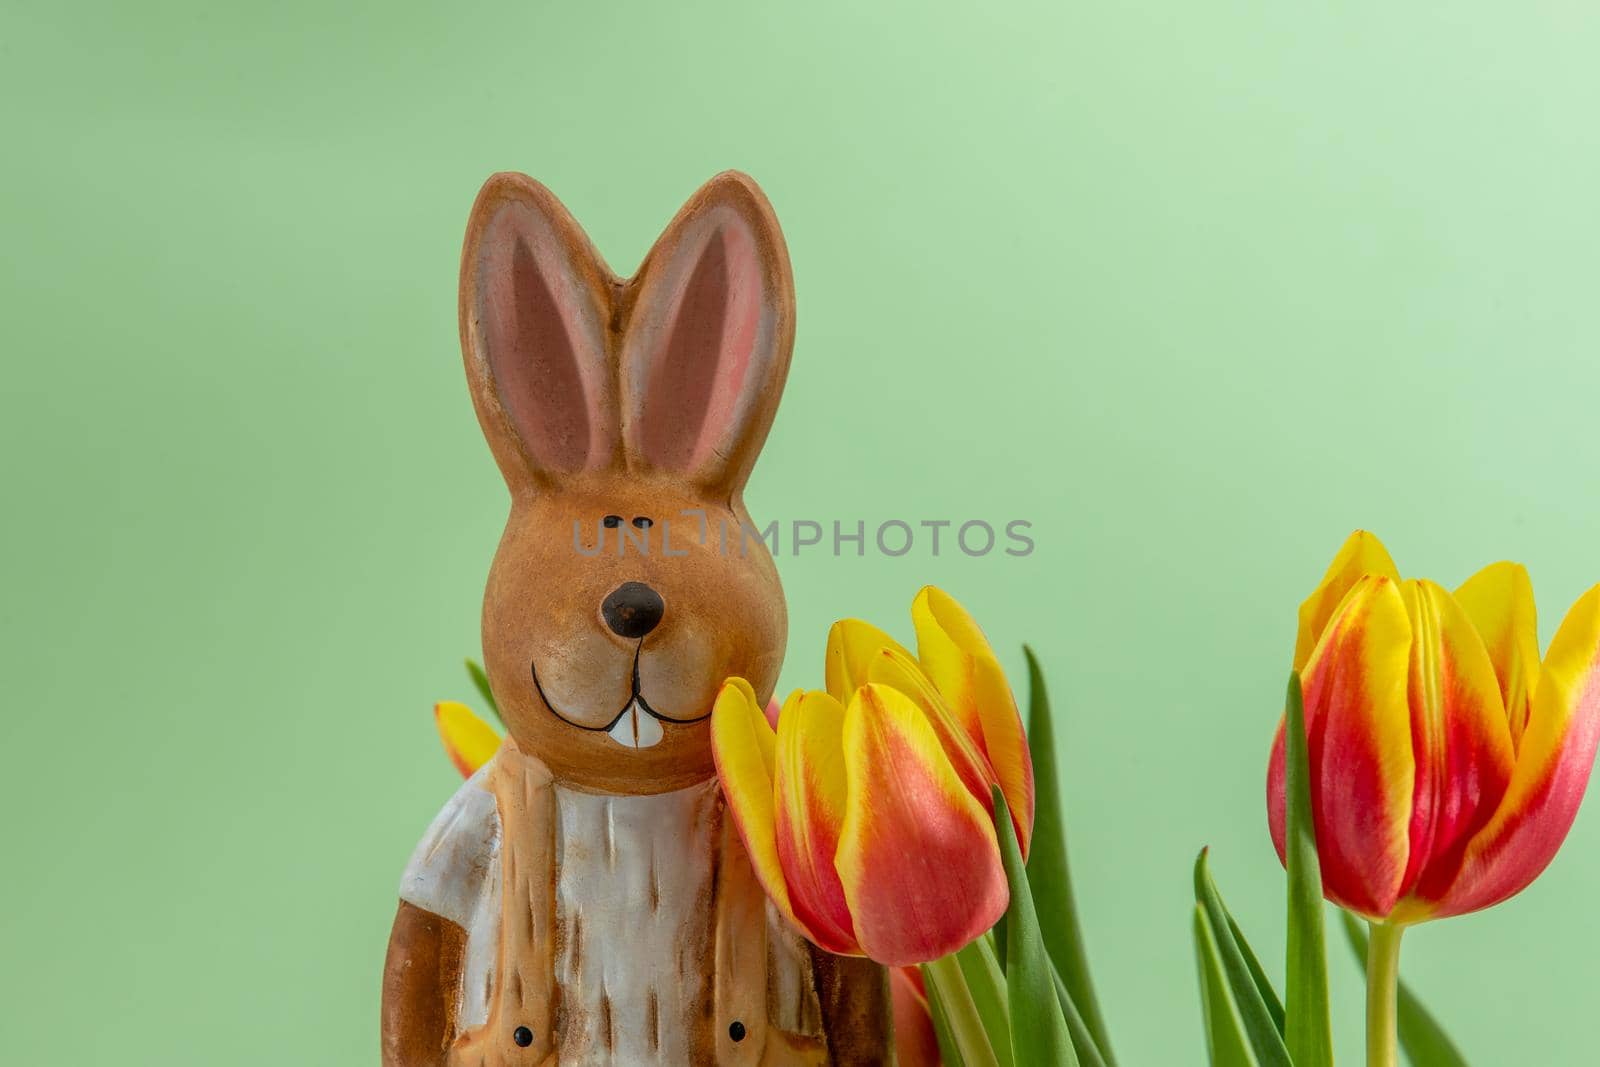 Easter bunny and bouquet with yellow red tulips against a light green background